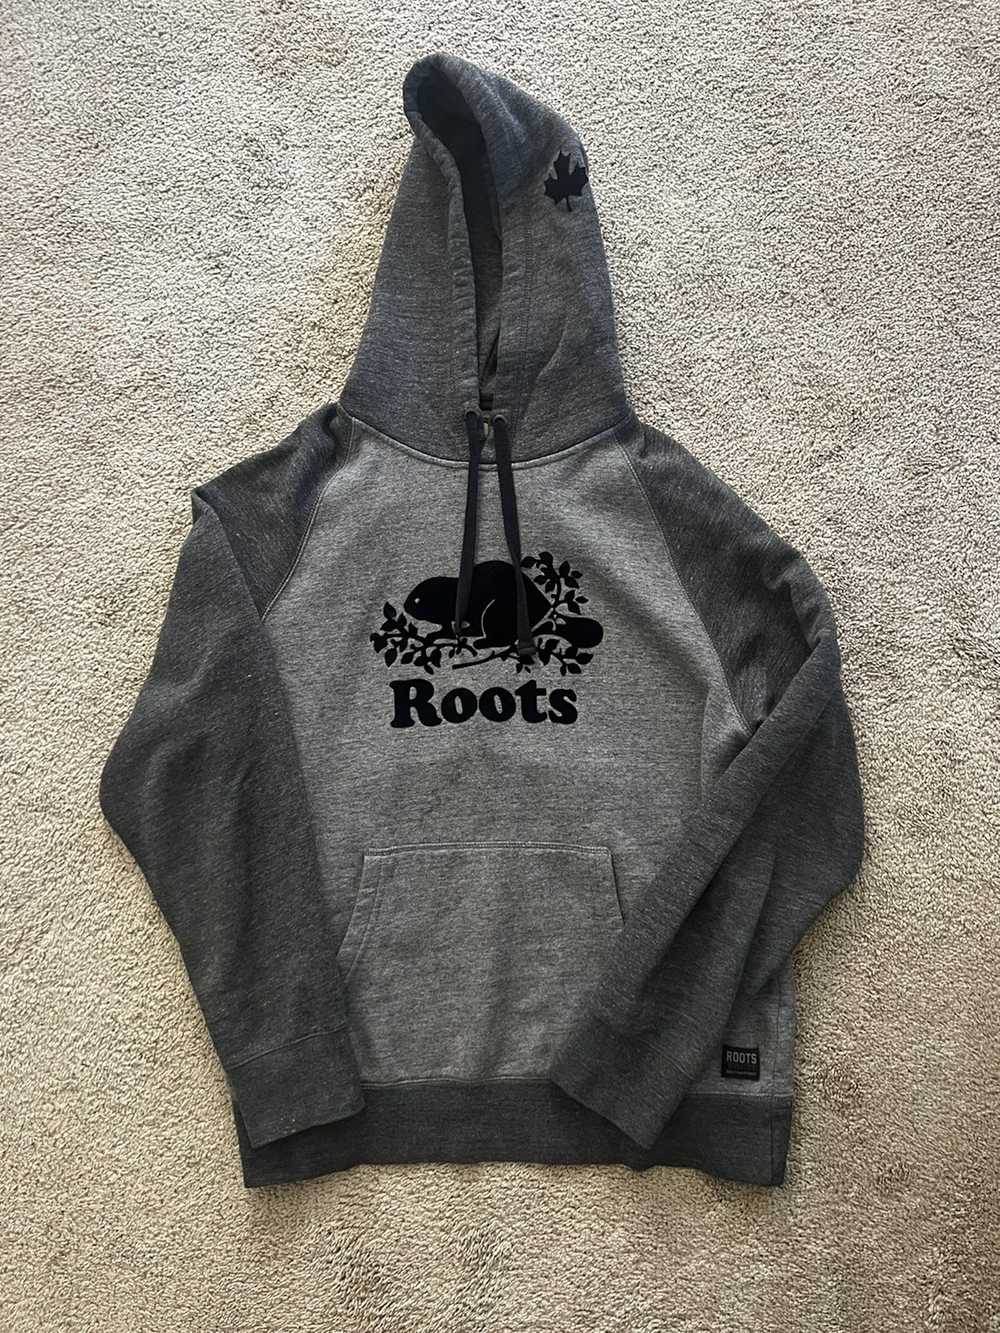 Roots Roots Hoodie - image 1